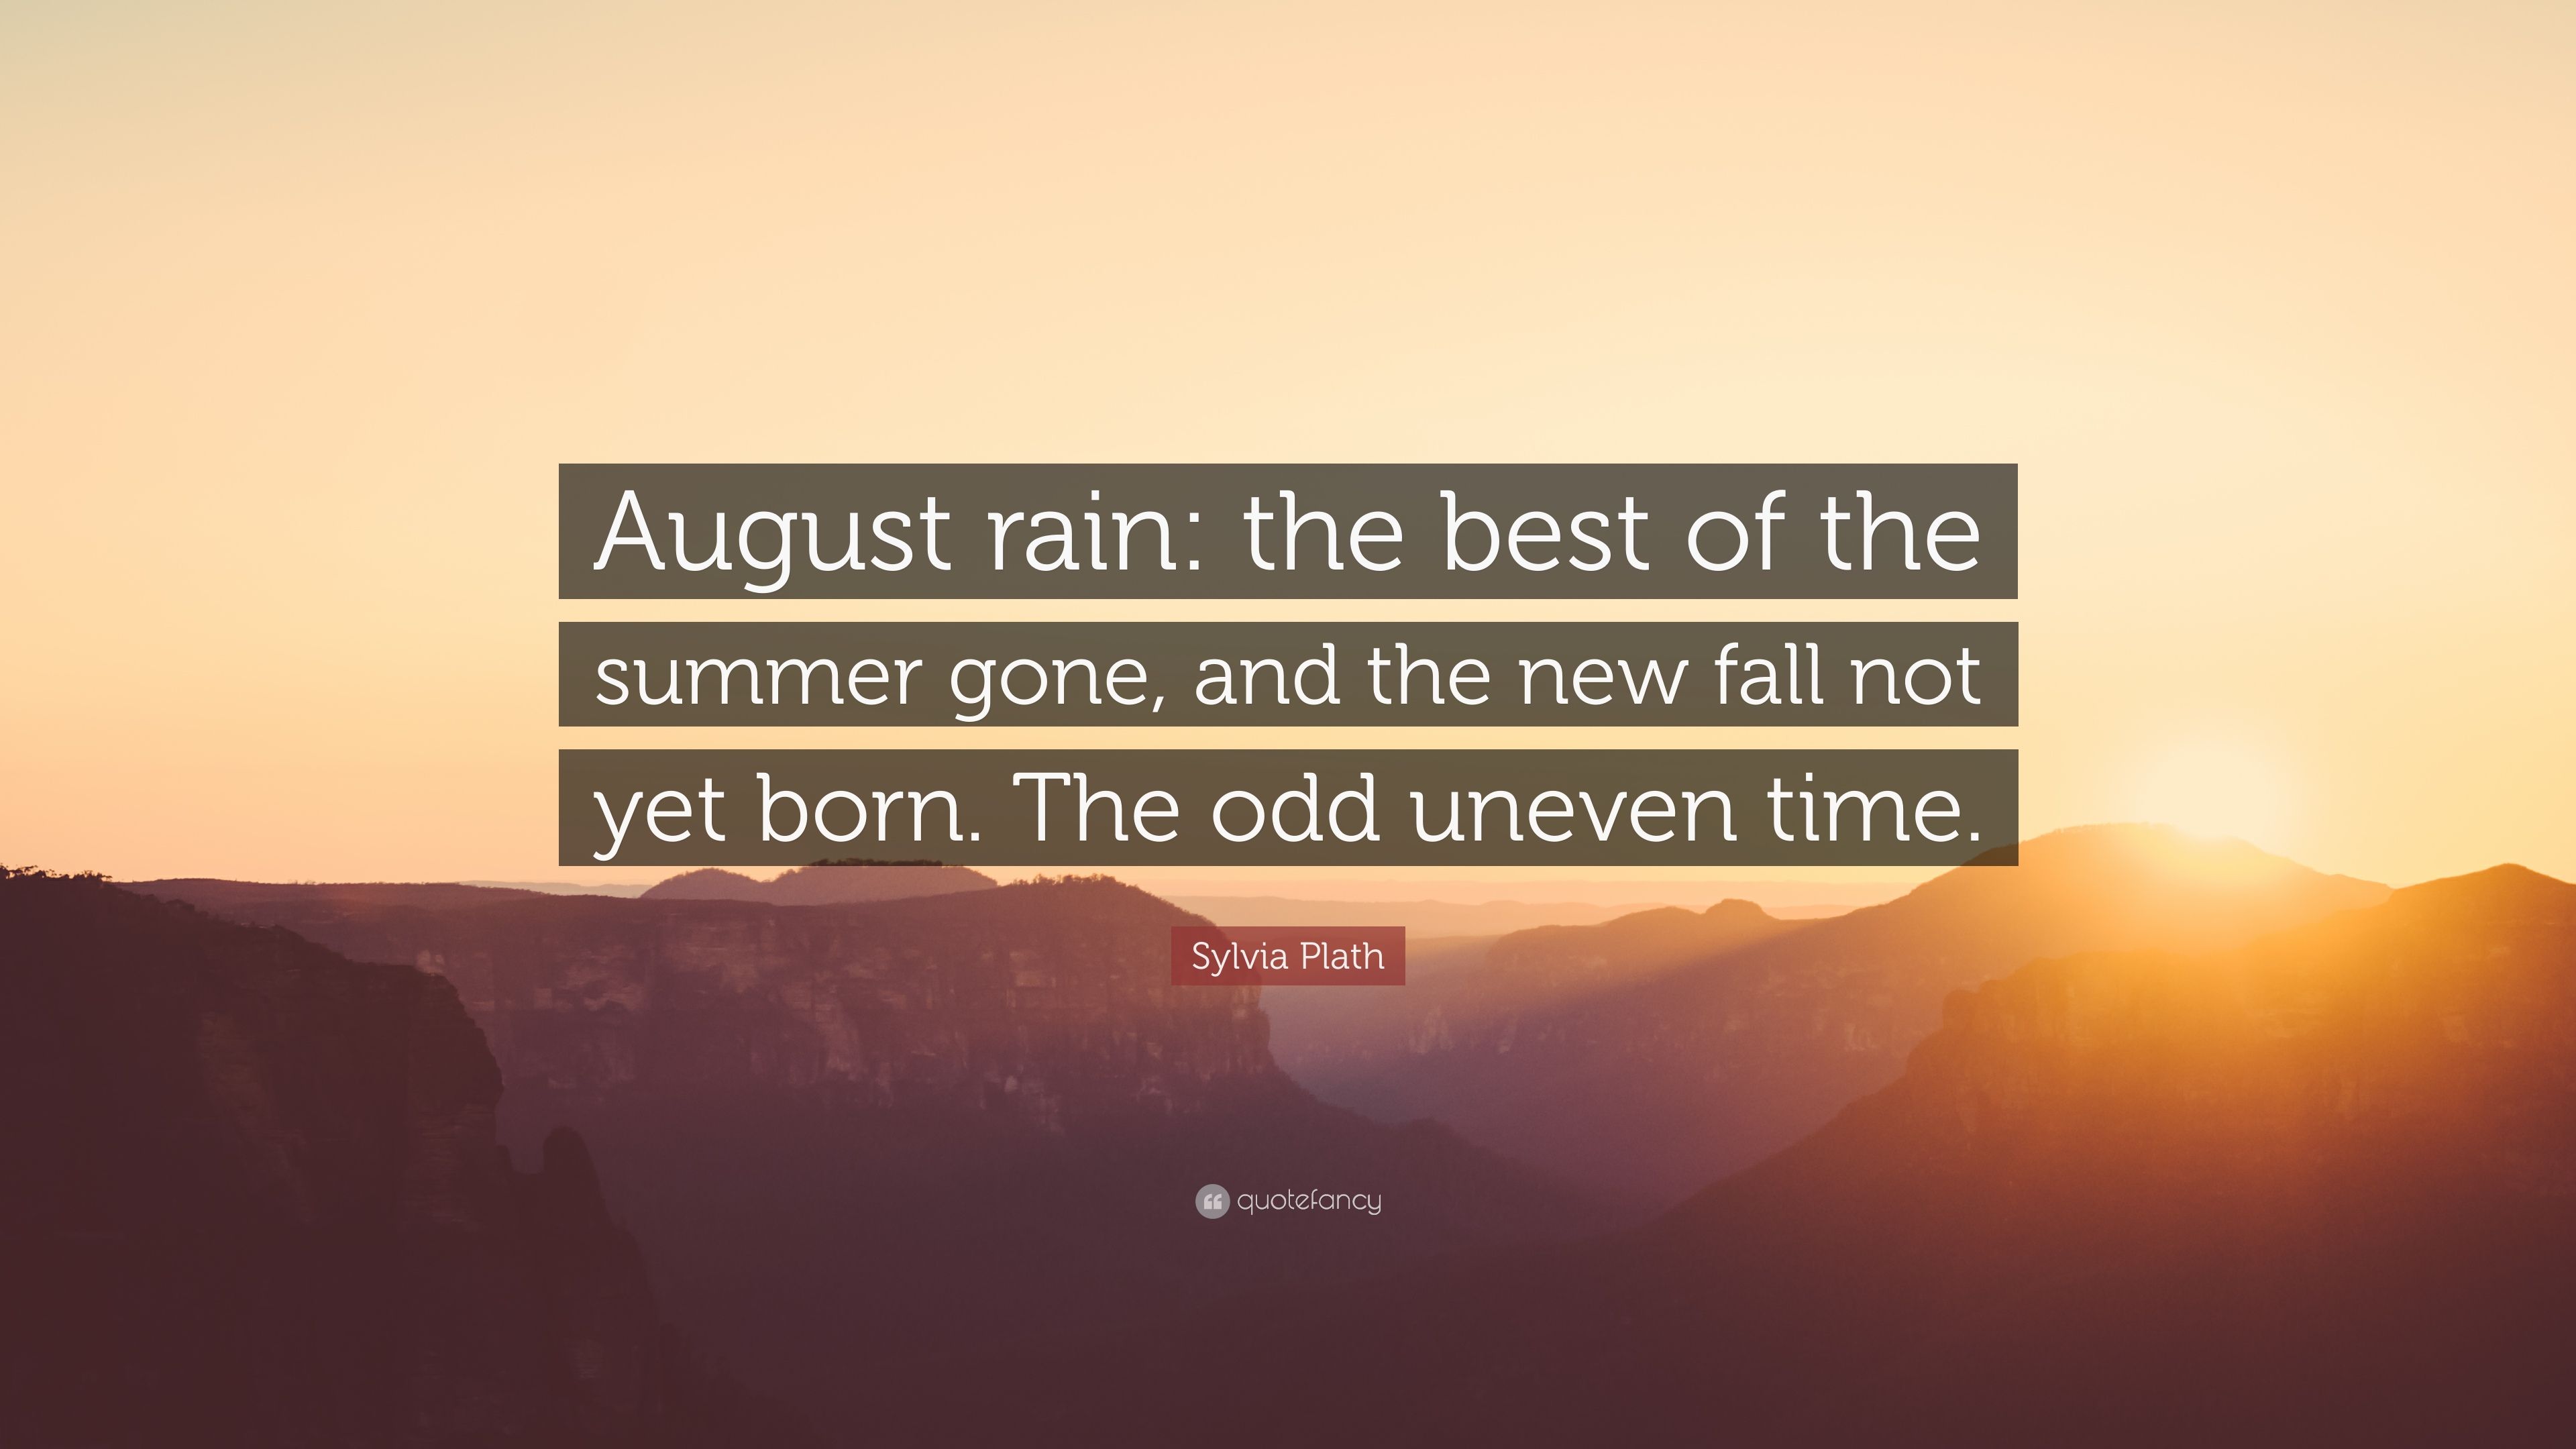 Sylvia Plath Quote: “August rain: the best of the summer gone